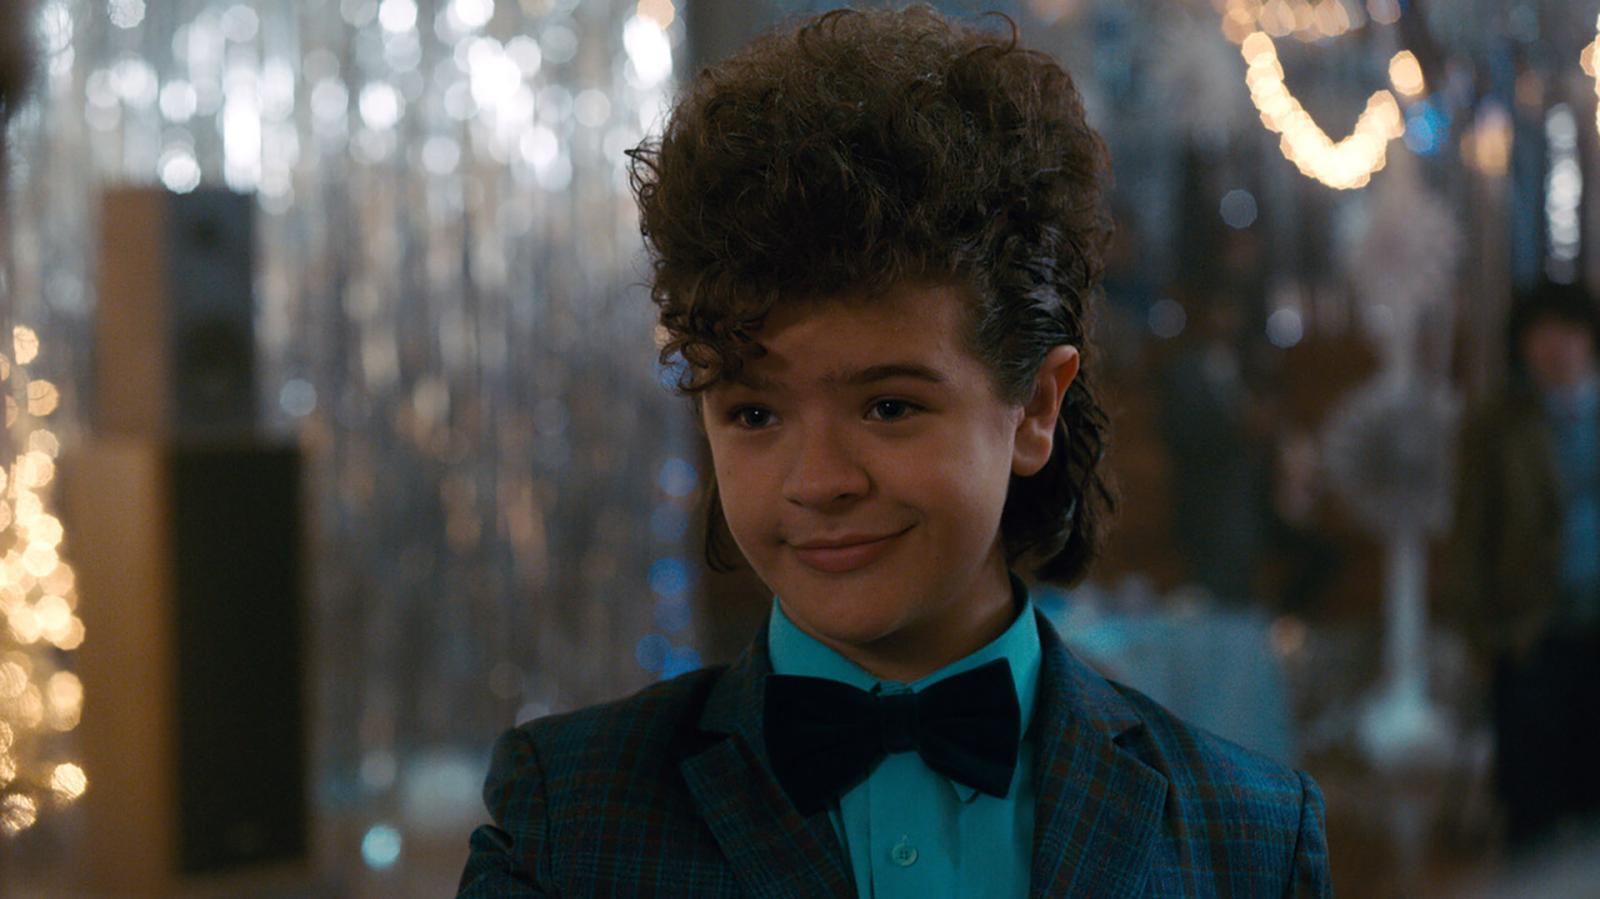 Discover Your Stranger Things Alter Ego Based on Your Zodiac - image 9